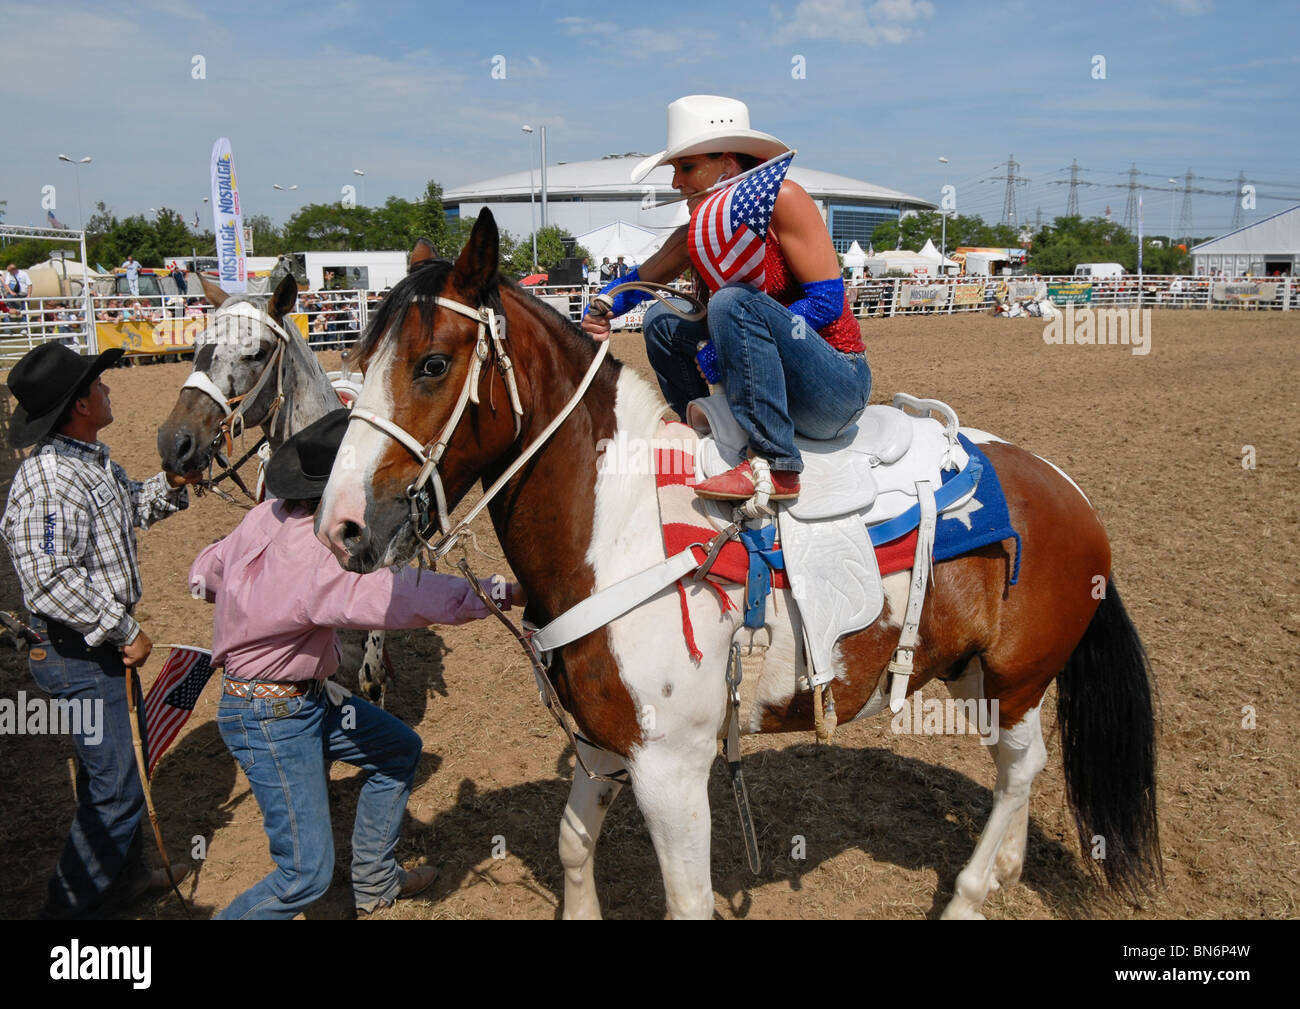 Cowgirl riding a horse at a rodeo parade Stock Photo